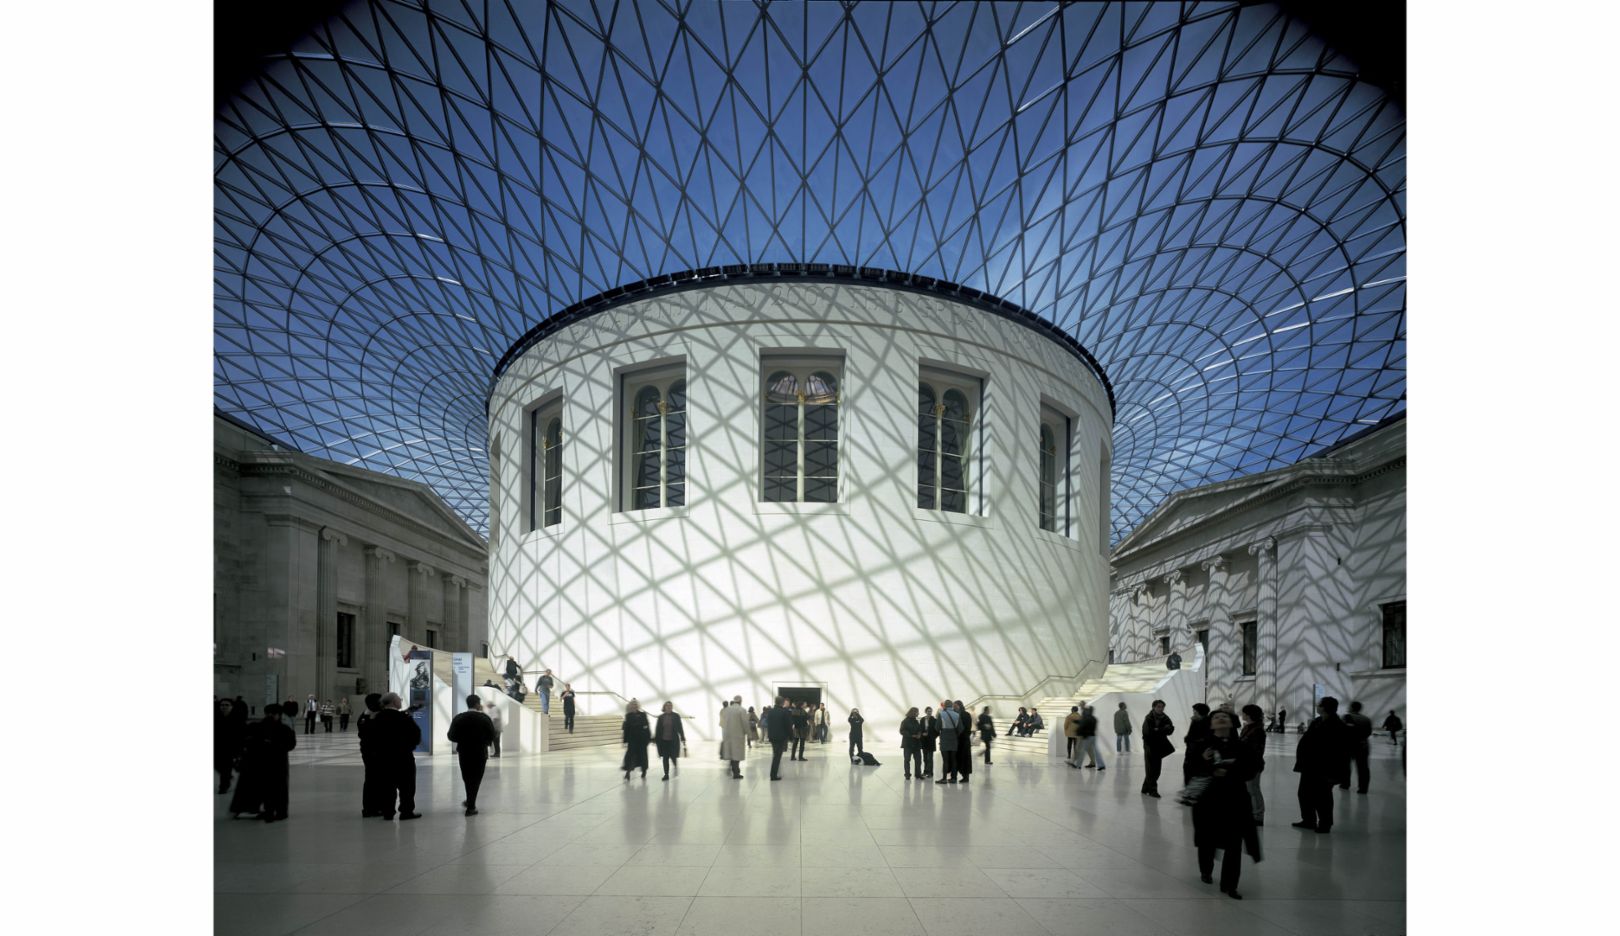 Queen Elizabeth II herself opened the Great Court, a covered square inside London's British Museum, in December 2000. The spacious atrium has become a meeting place for visitors and locals alike. Photo: Foster + Partners